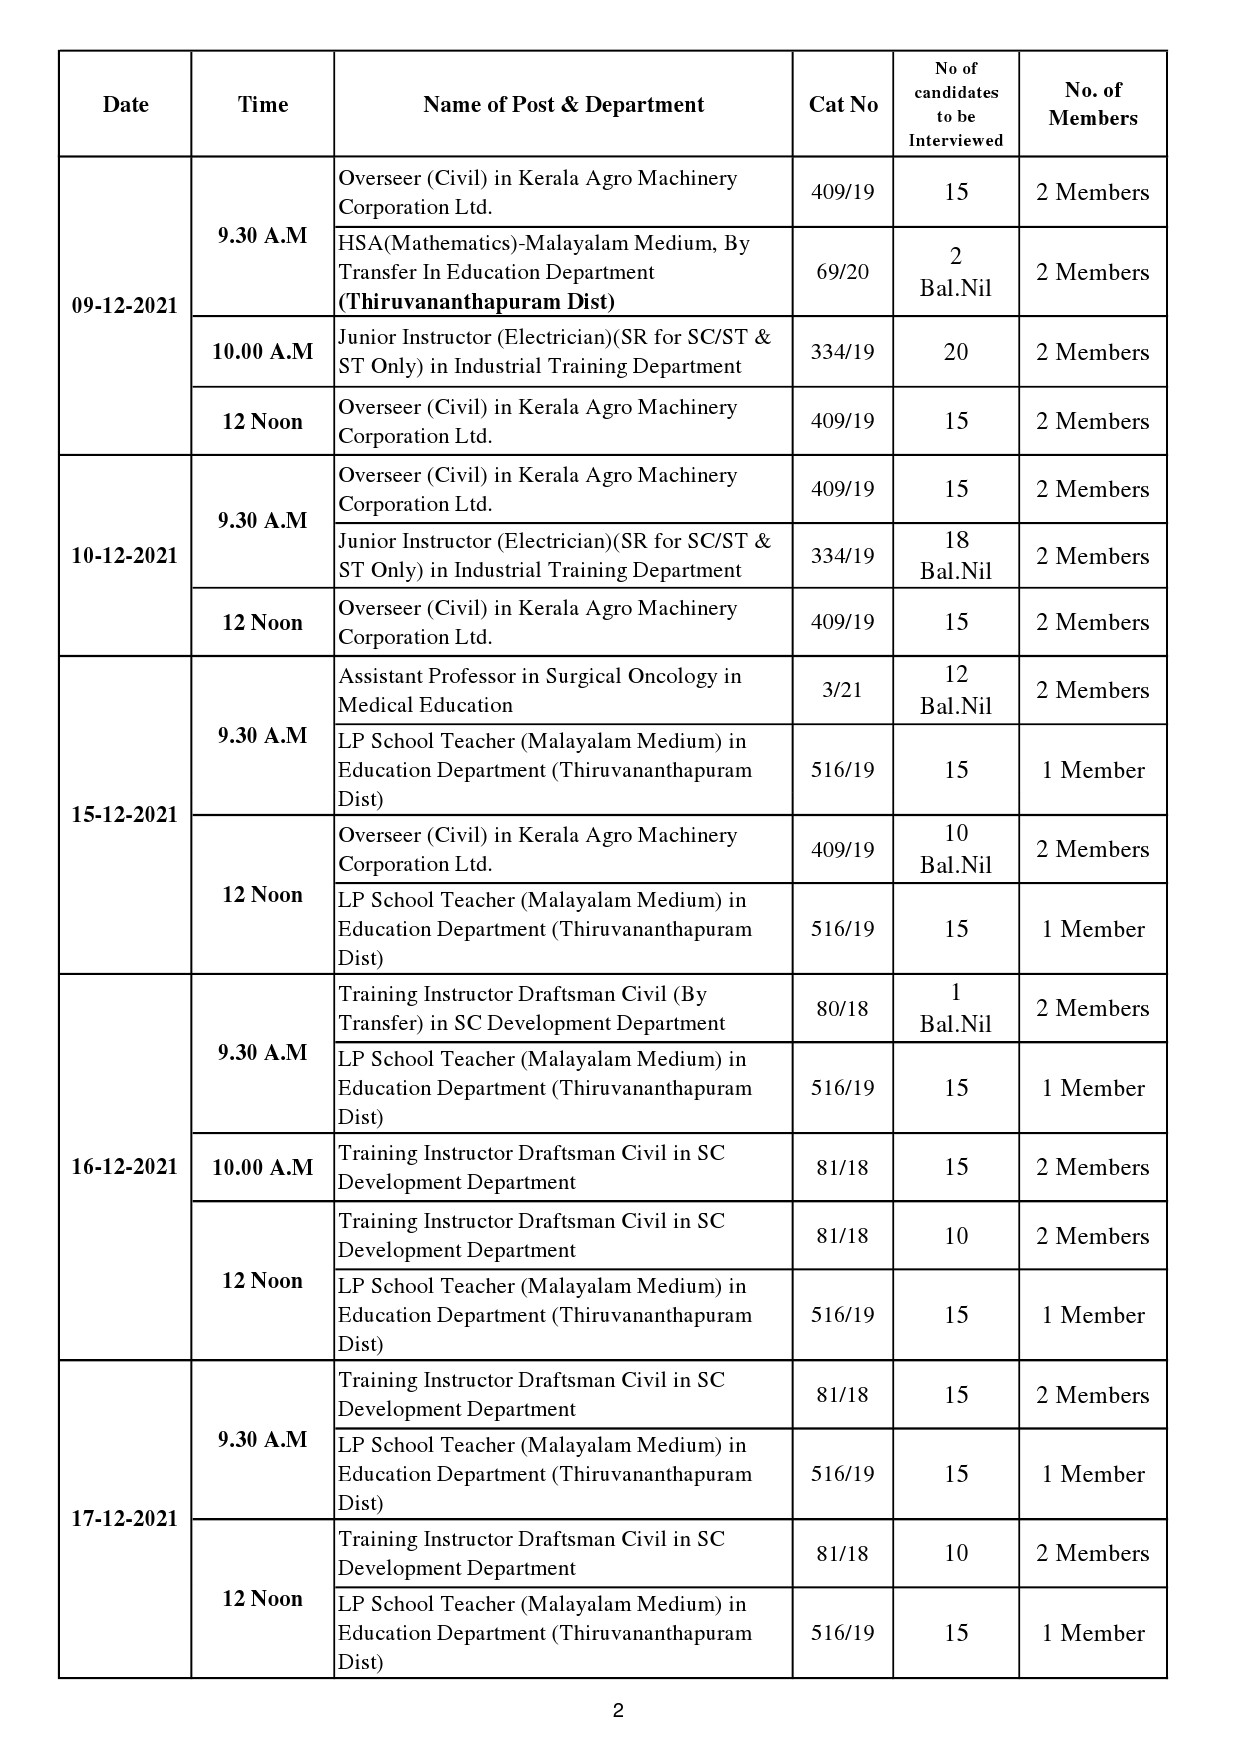 KPSC Interview Programme For The Month Of December 2021 - Notification Image 2